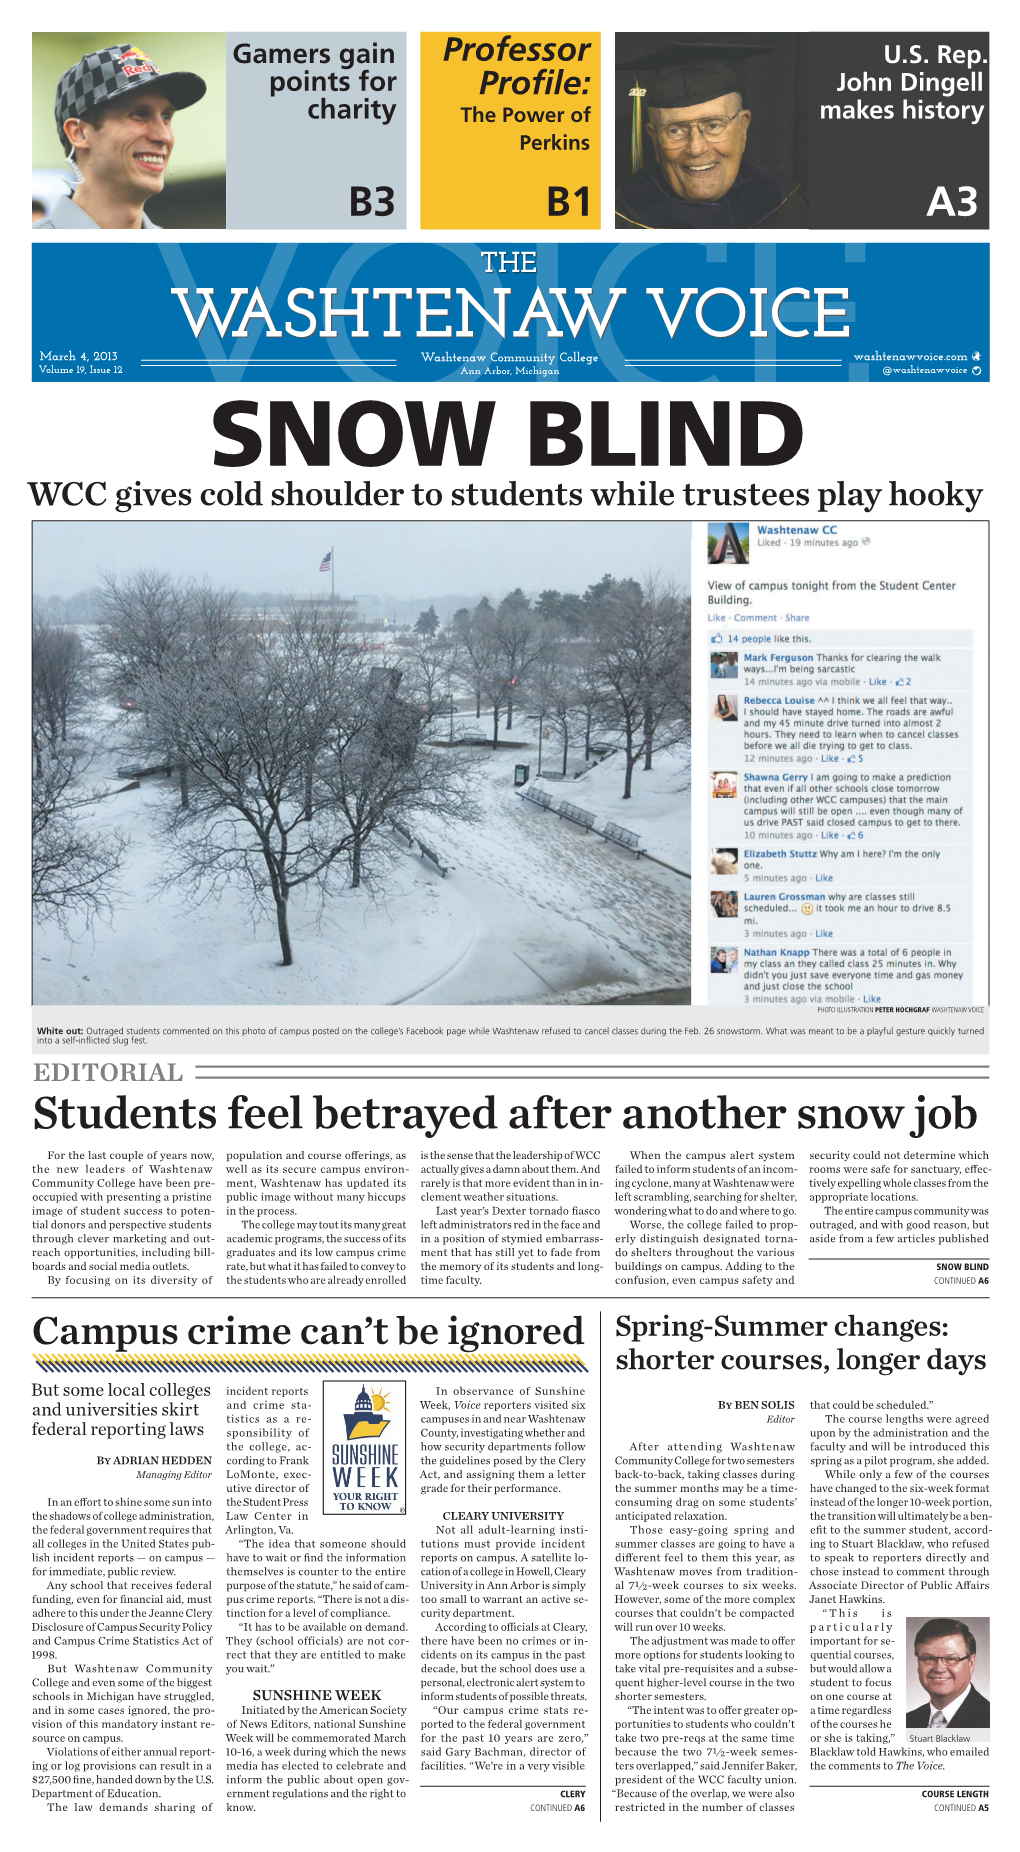 Students Feel Betrayed After Another Snow